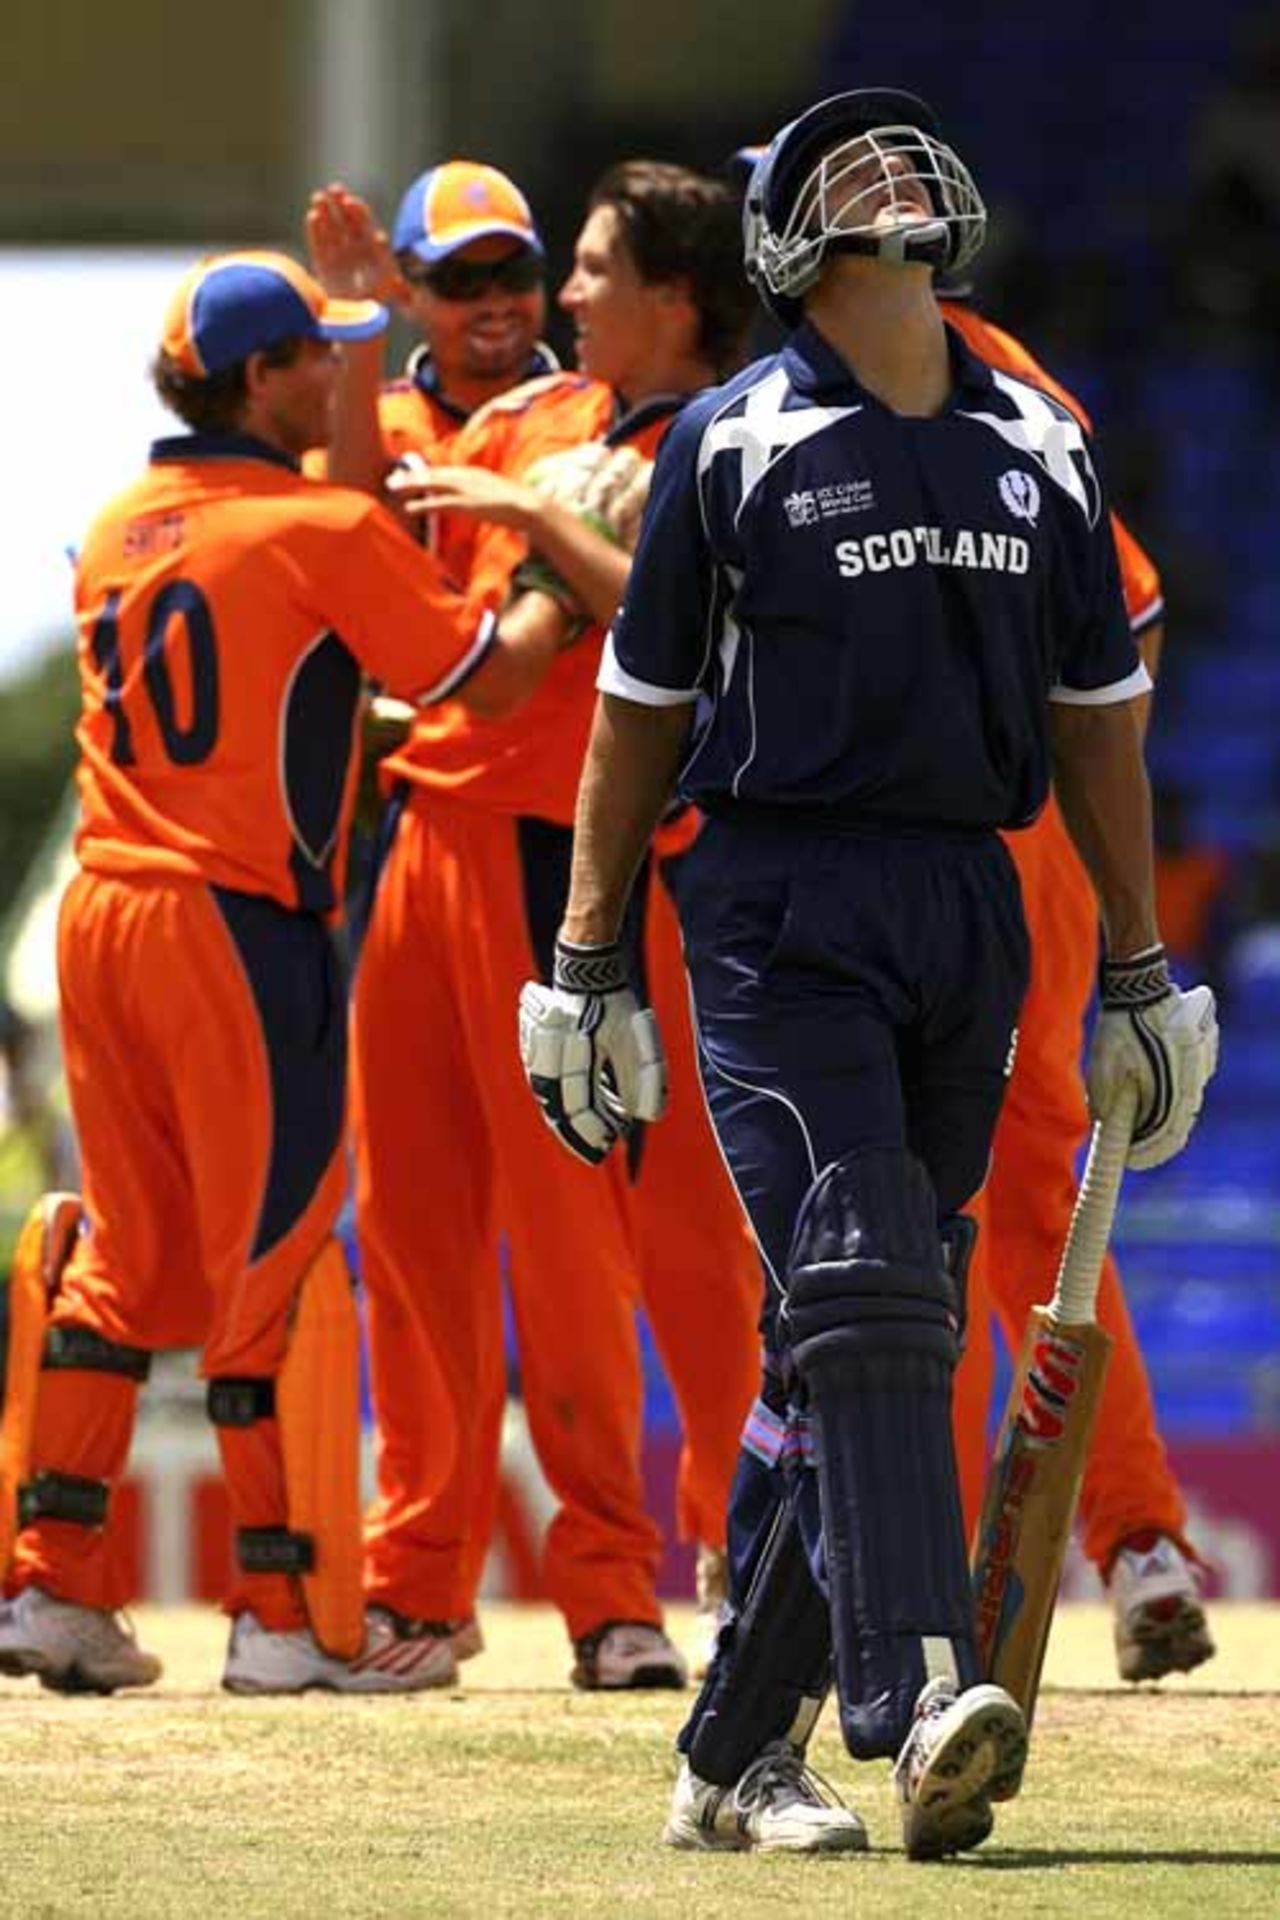 Colin Smith played some adventurous shots, but even he could not manage more than 19, Netherlands v Scotland, Group A, St Kitts, March 22, 2007